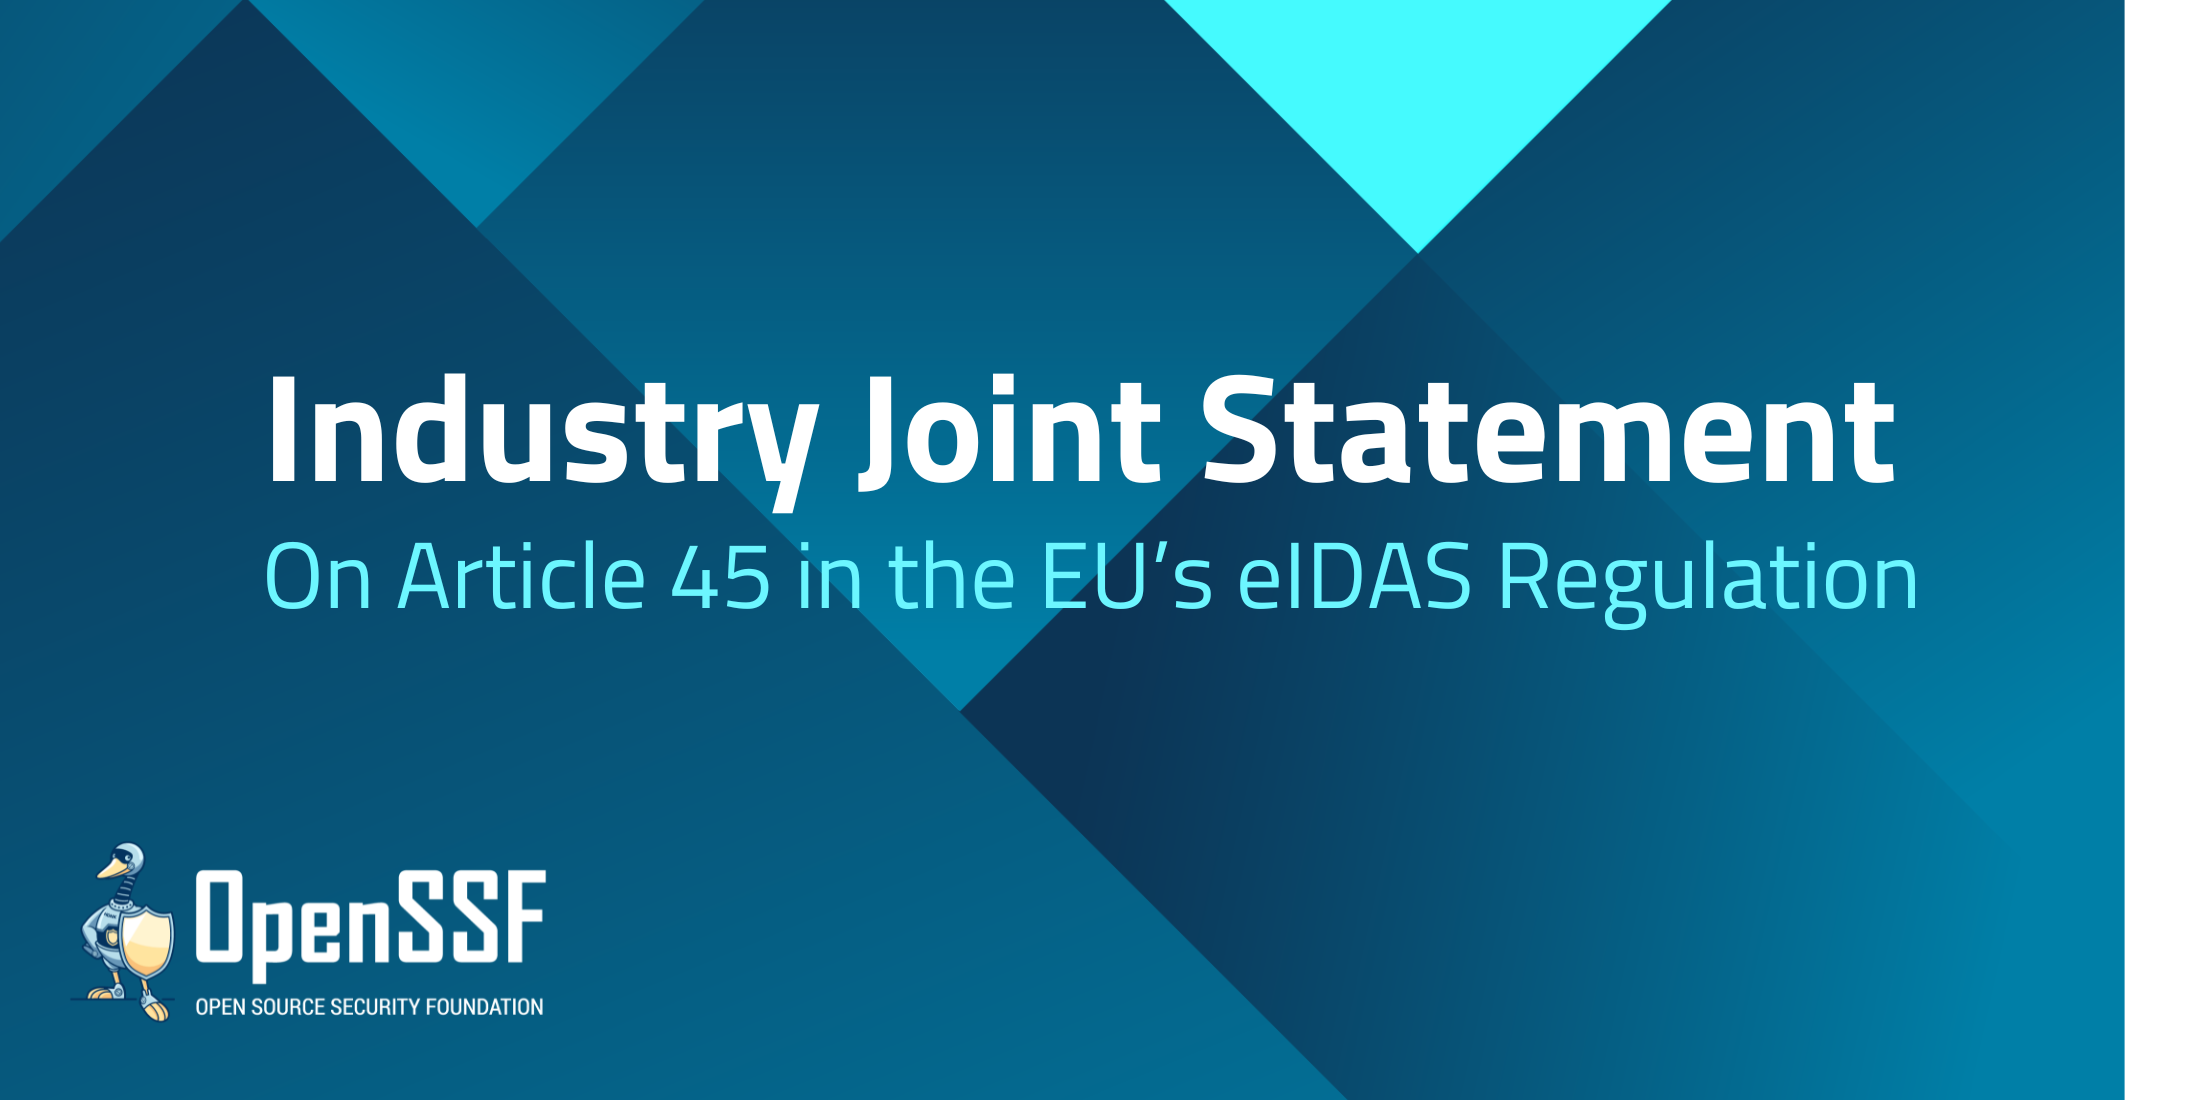 Industry Joint Statement on Article 45 in the EU eIDAS Regulation